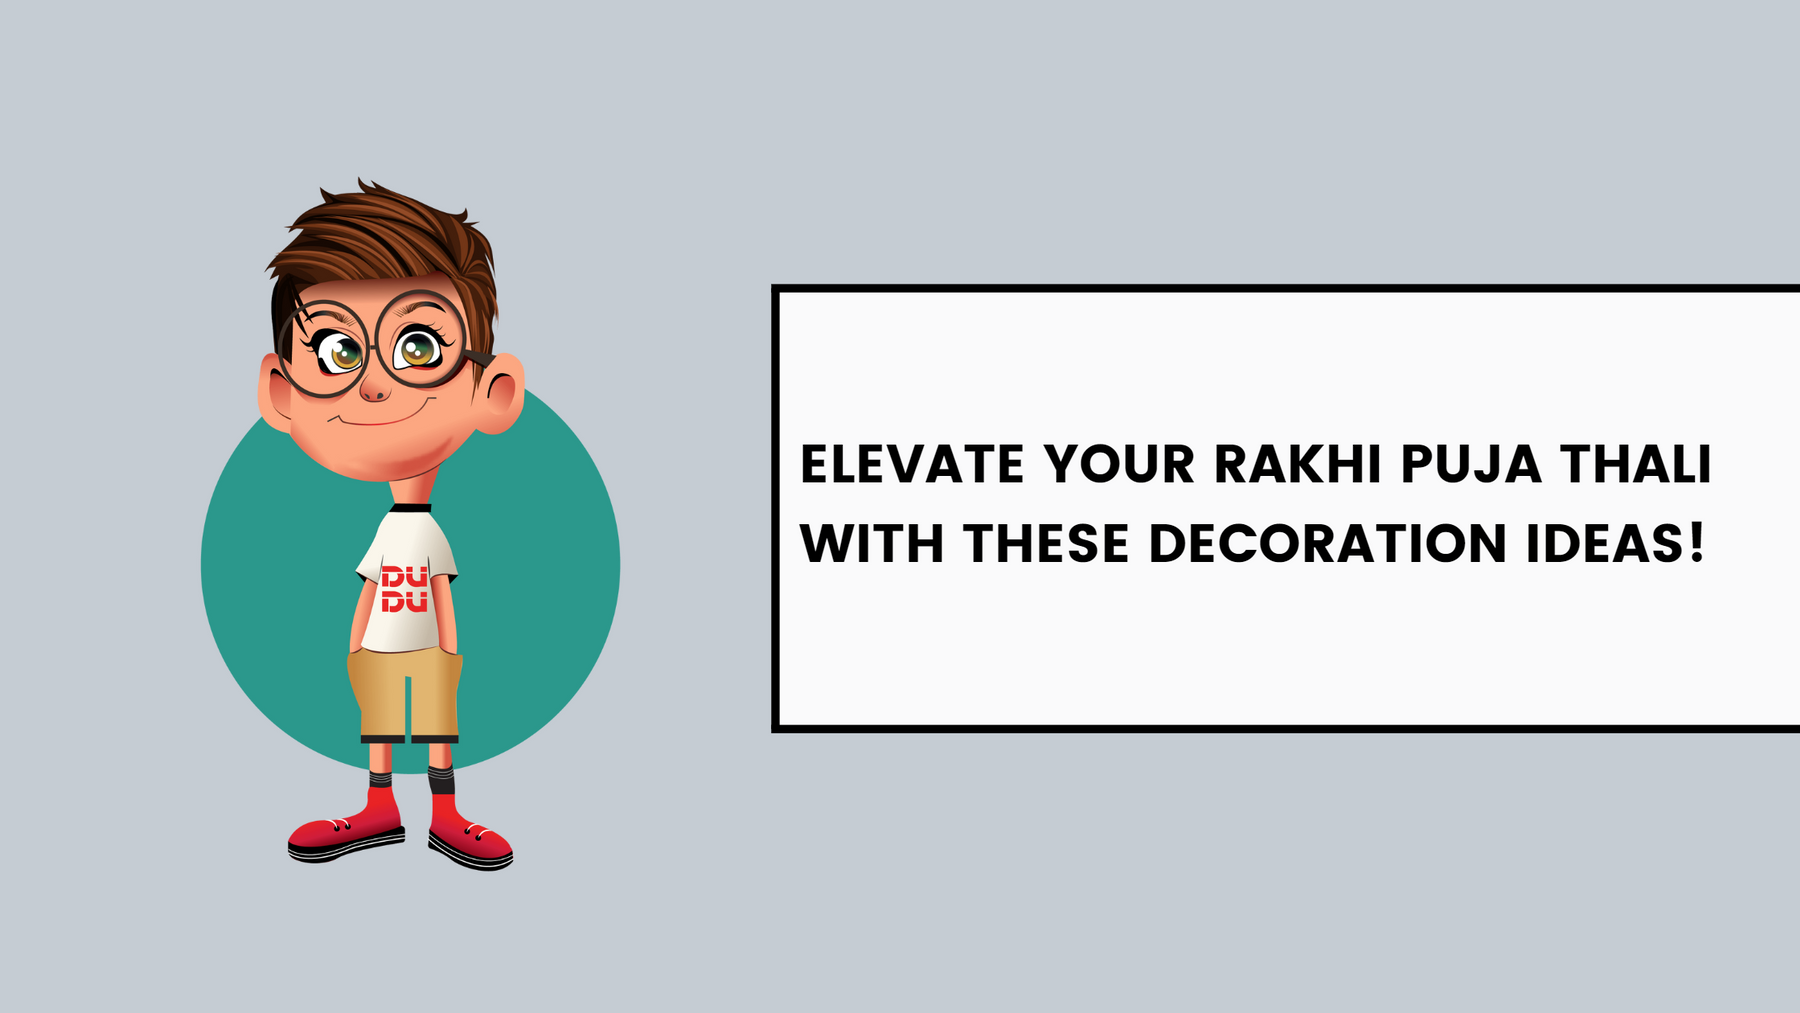 Elevate Your Rakhi Puja Thali With These Decoration Ideas!